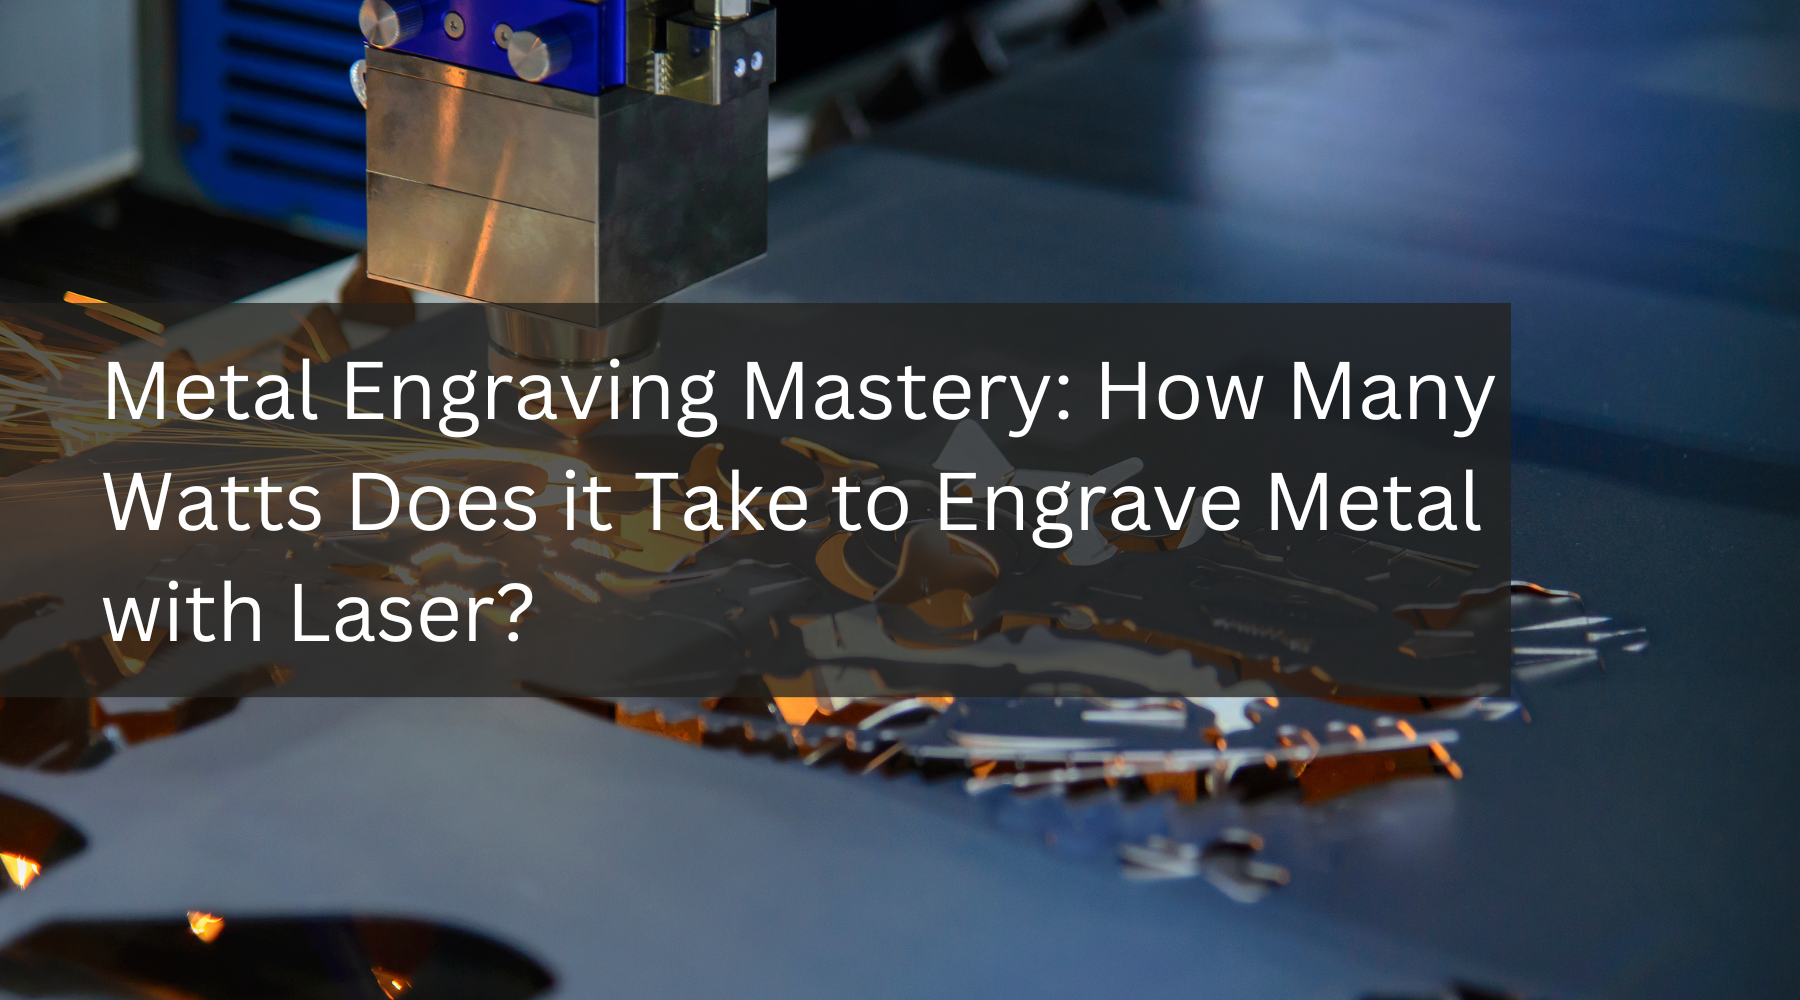 Metal Engraving Mastery: How Many Watts Does it Take to Engrave Metal with Laser?